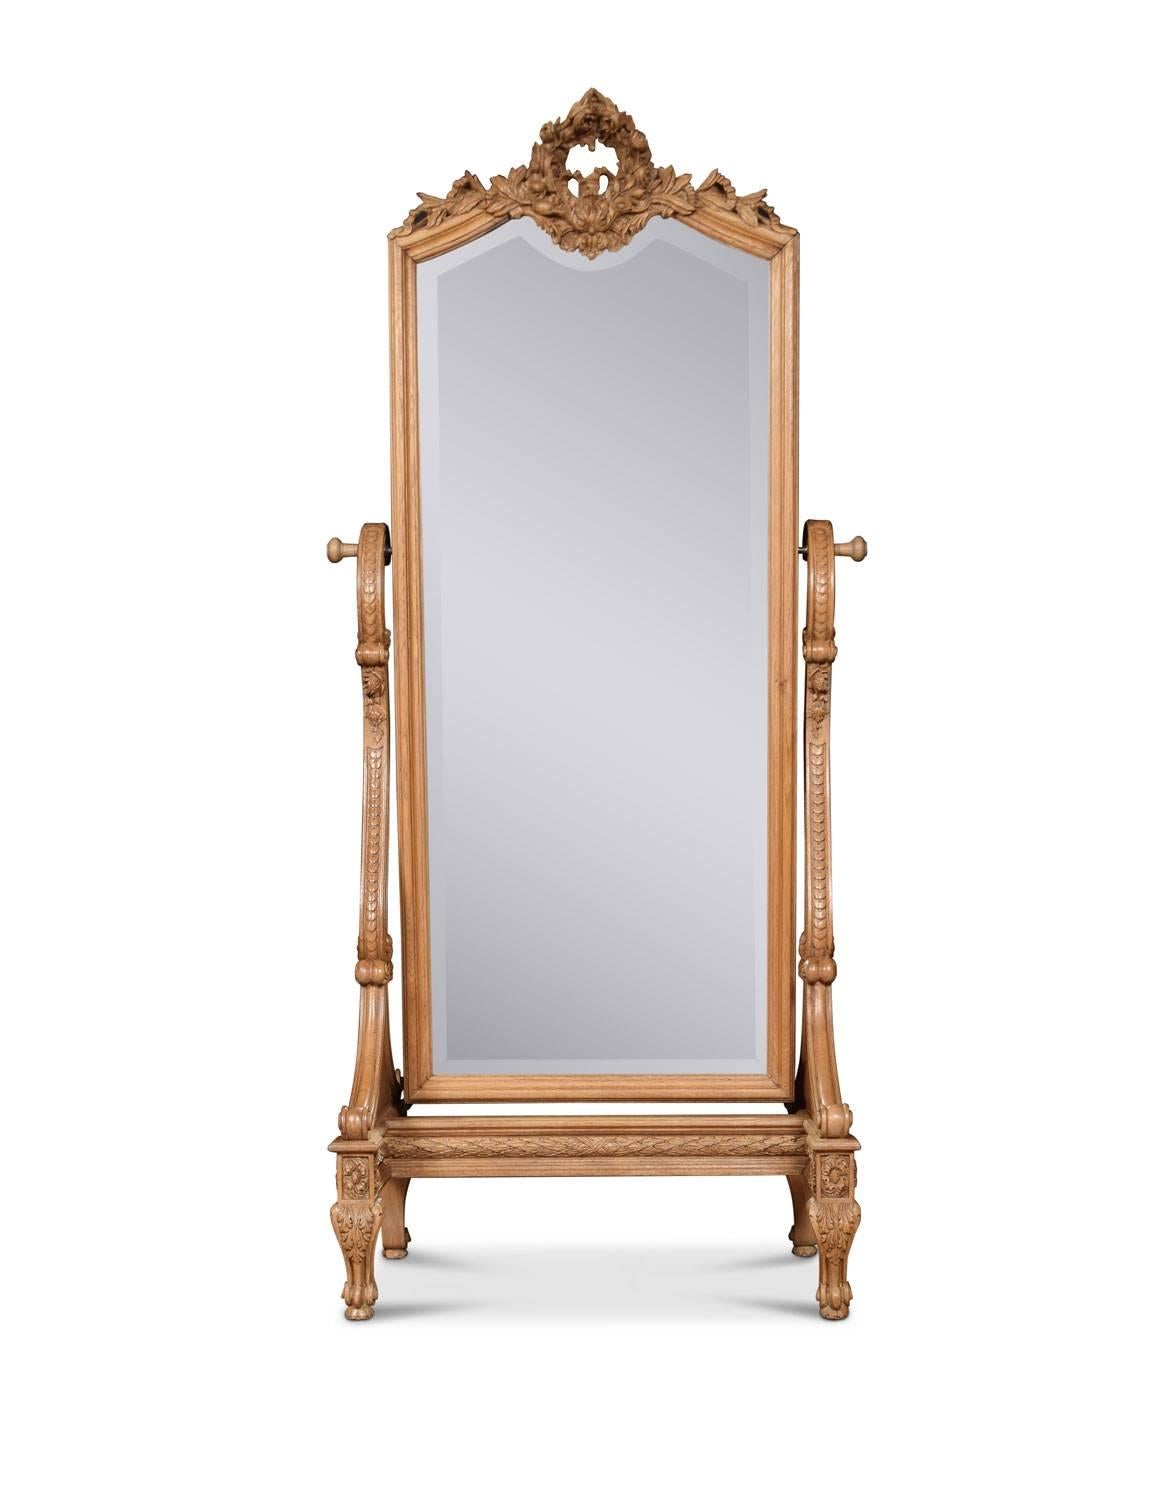 Blonde oak cheval mirror, the large rectangular bevelled mirror encased in oak frame with floral carved pediment. Supported on two scrolled carved supports, all raised up on four acanthus capped toupee feet.
Dimensions:
Height 72.5 inches
Width